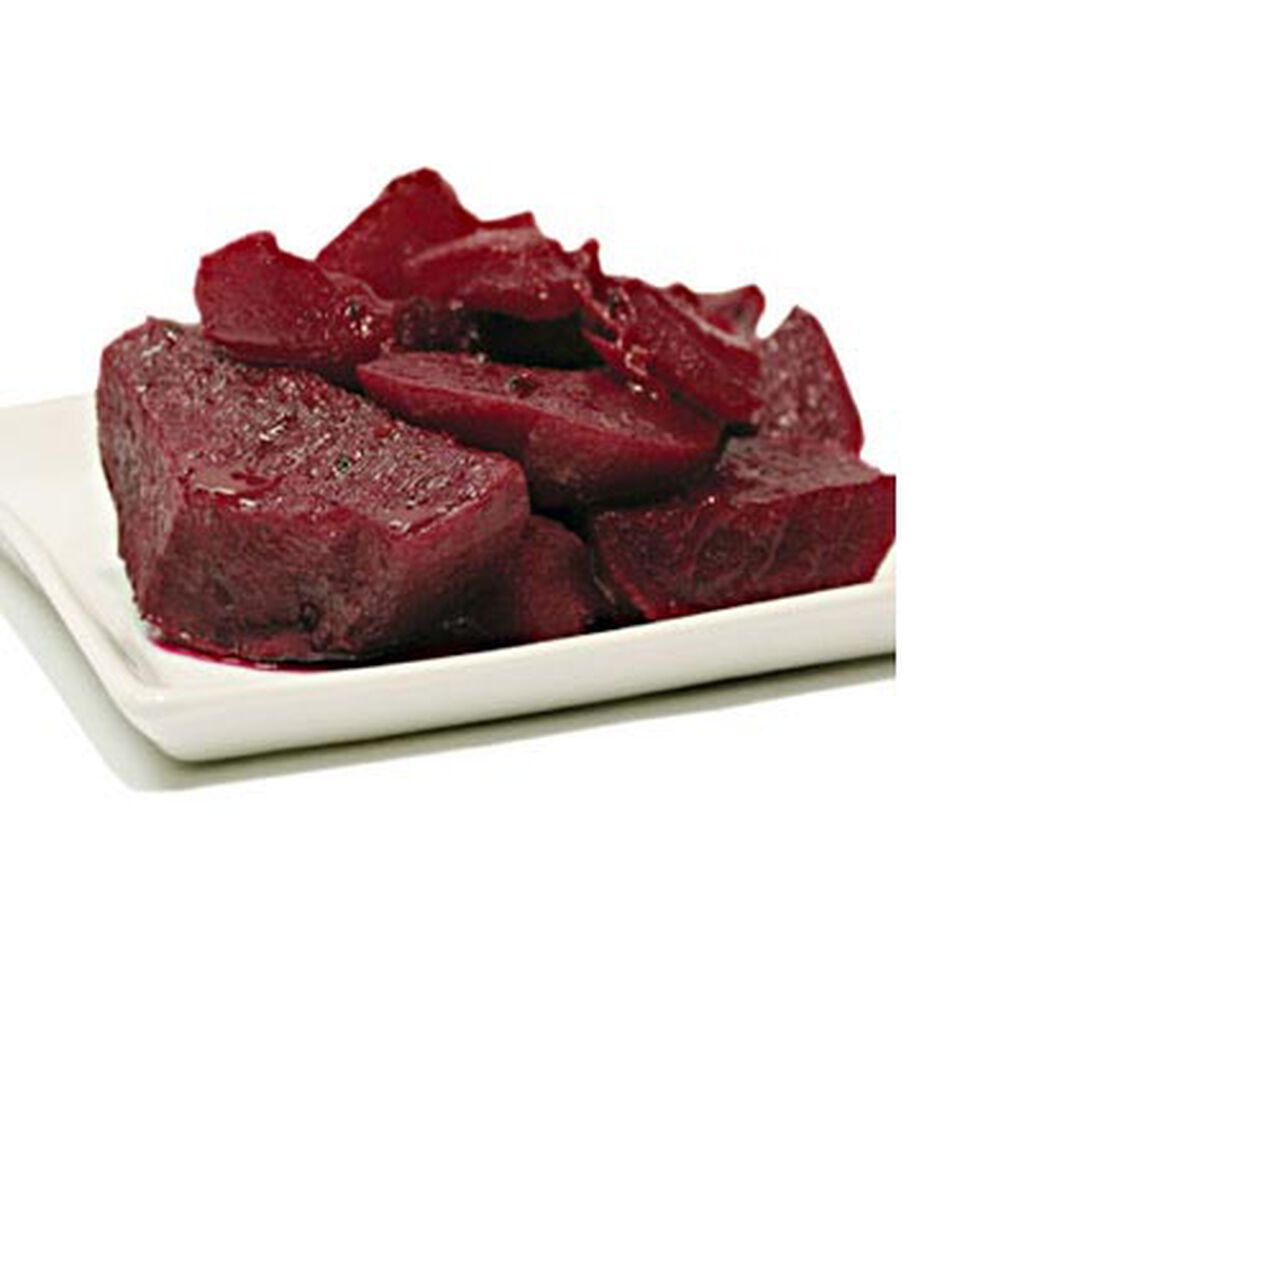 Honey Roasted Beets by Zabar's - 1-lb, , large image number 0